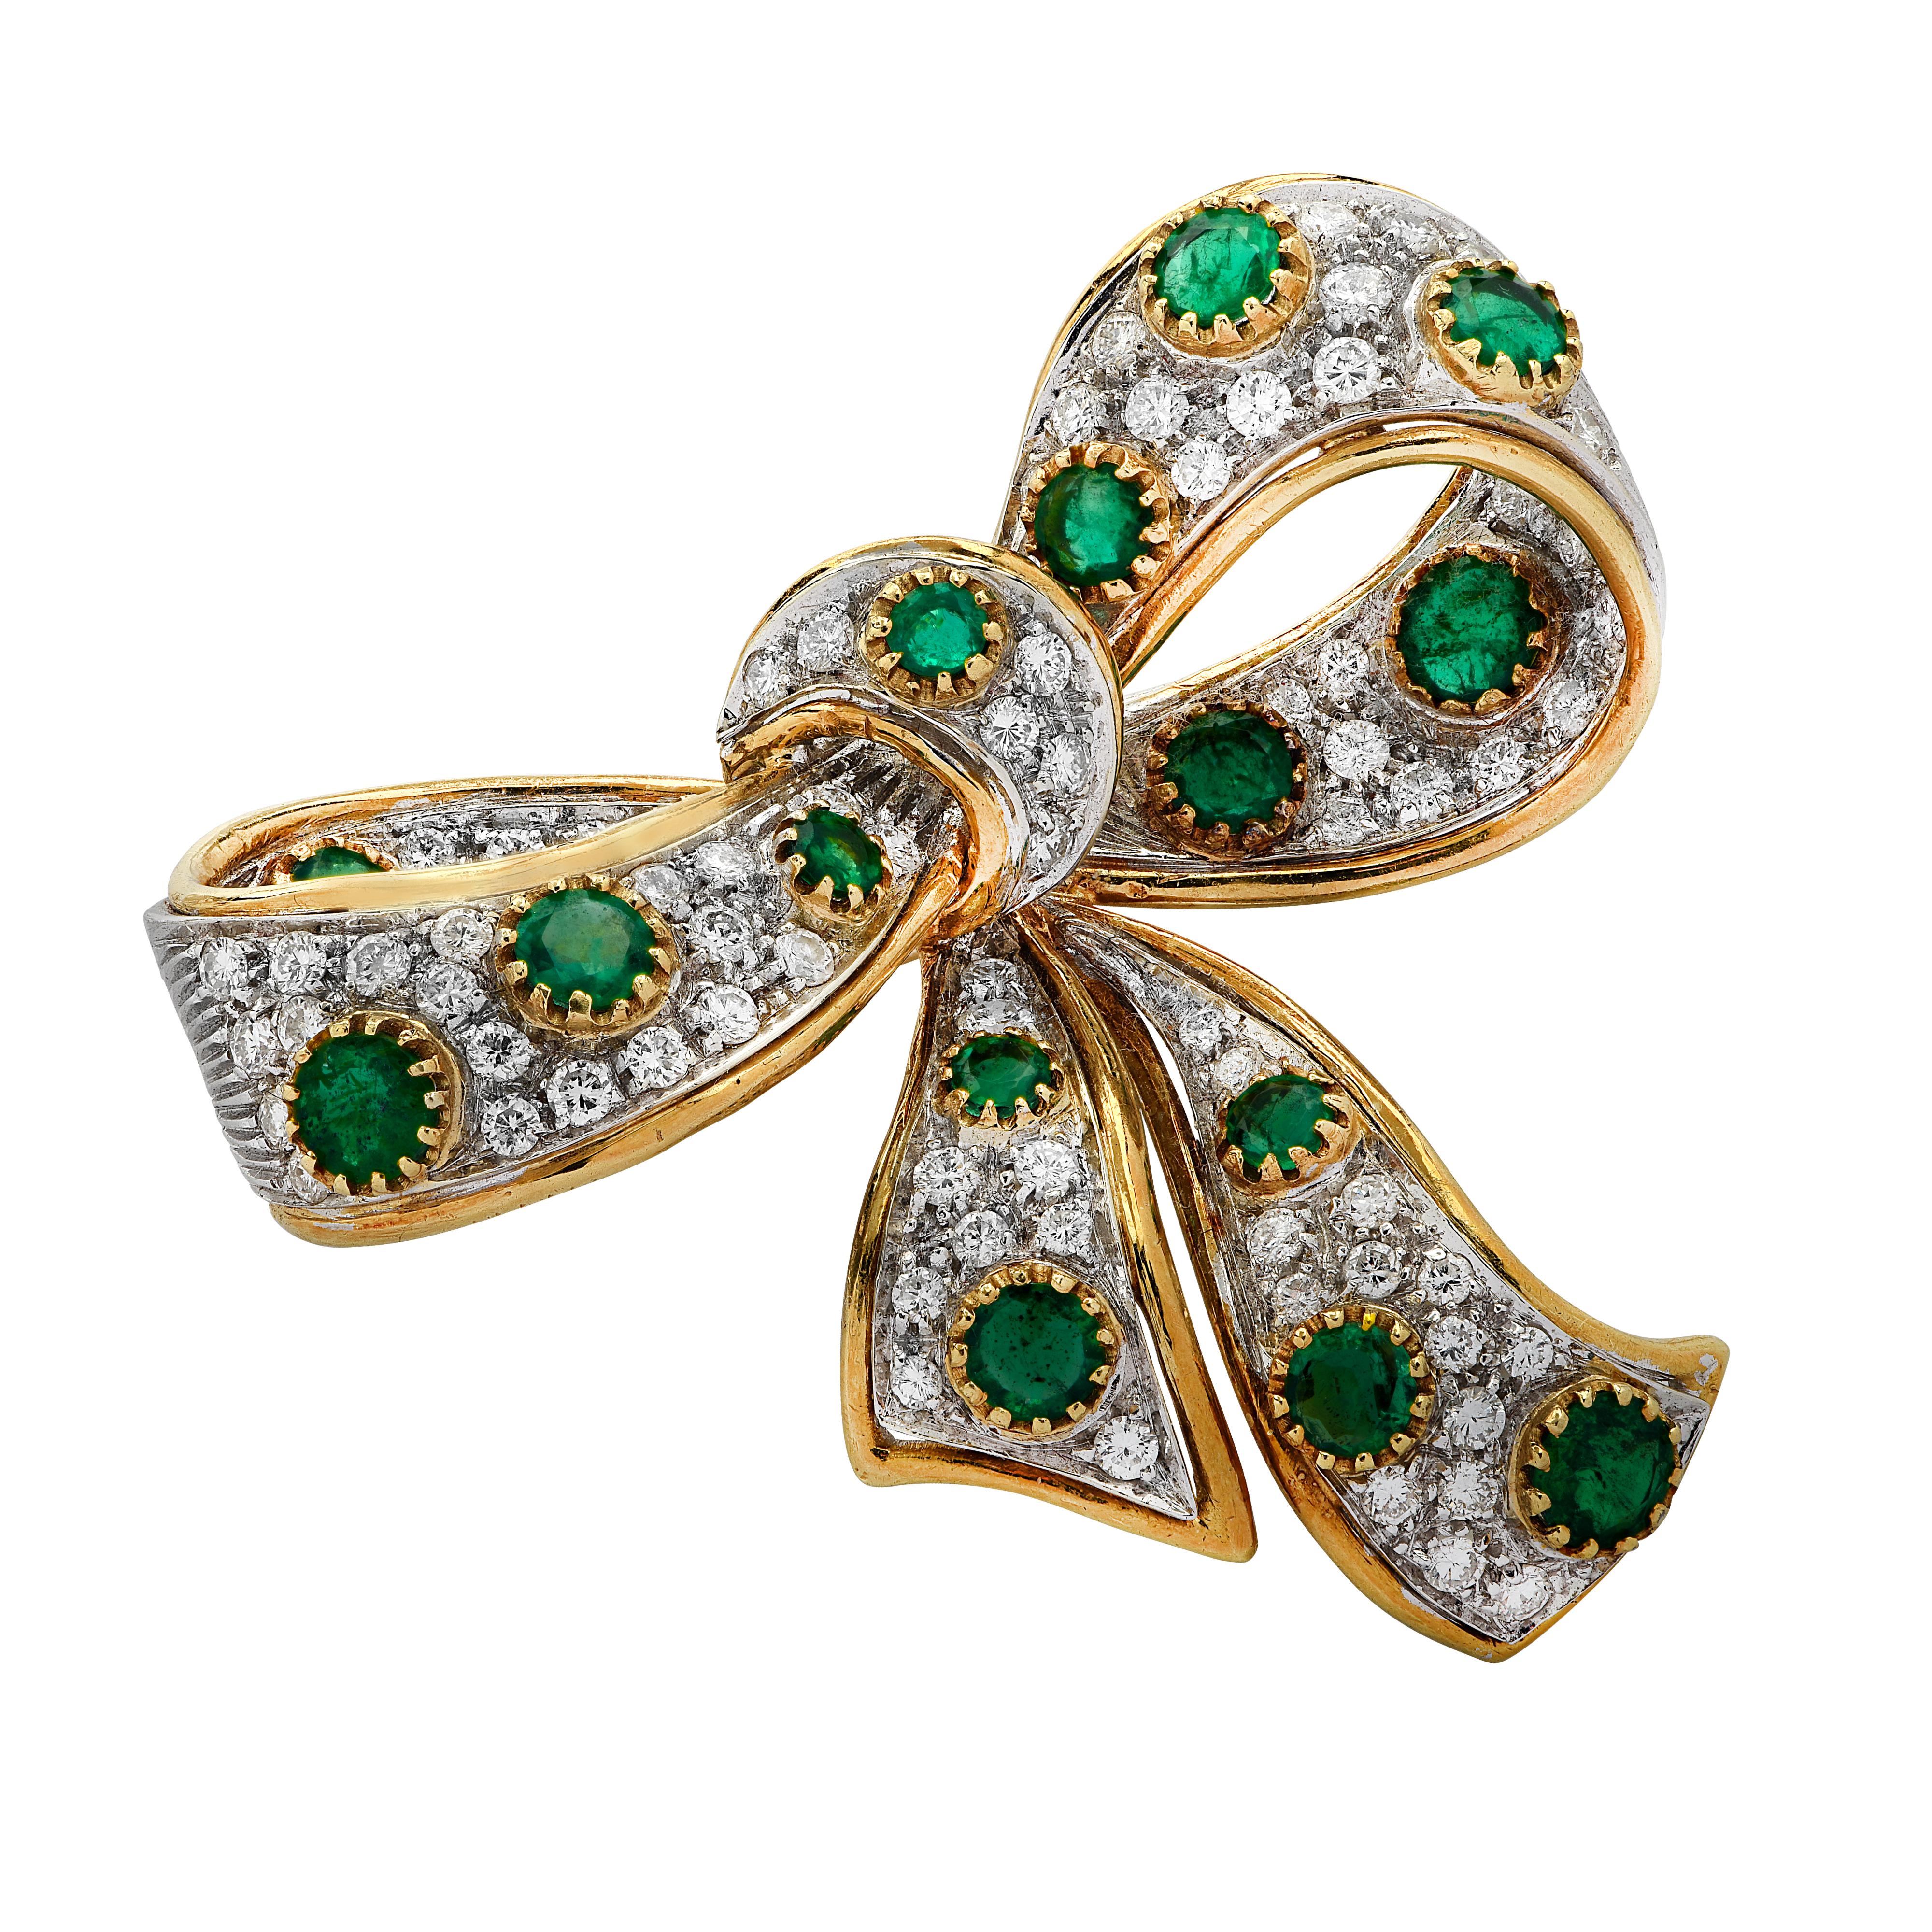 Delightful brooch pin finely crafted in Italy in 18 karat yellow and white gold, featuring  81 round brilliant cut diamonds weighing approximately 2.5 carats total, G color, VS-SI clarity and  16 round emeralds weighing approximately 2.50. This